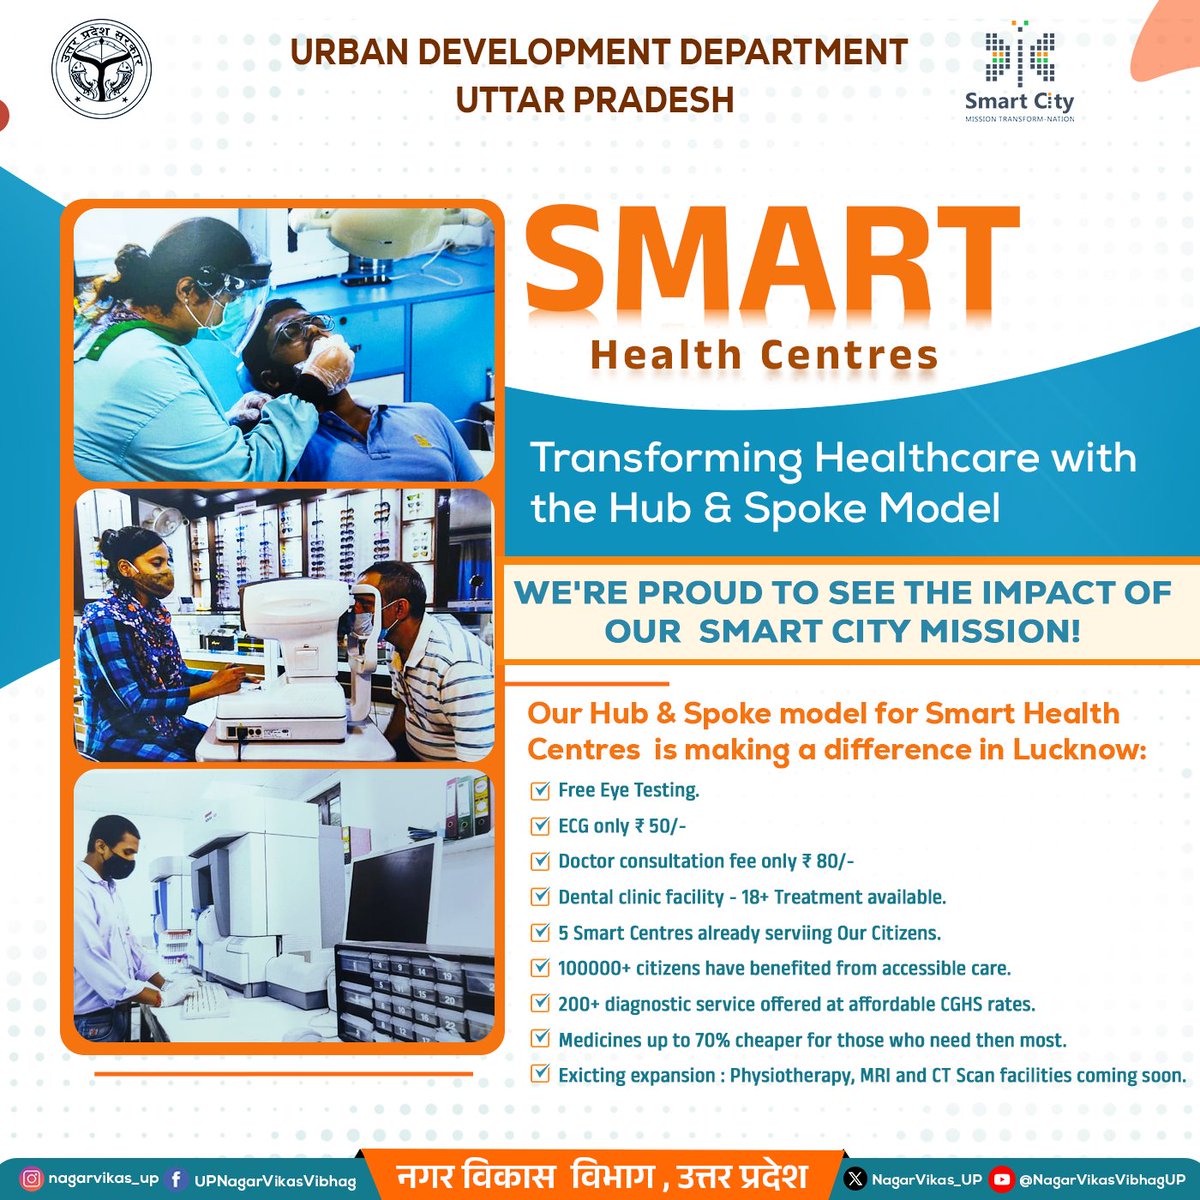 Discover the future of healthcare in AGRA with SMART Health Centres! Affordable, accessible, and advanced care is now at your fingertips. 

#TransformingHealthcare #SmartCityMission #uttarpradesh